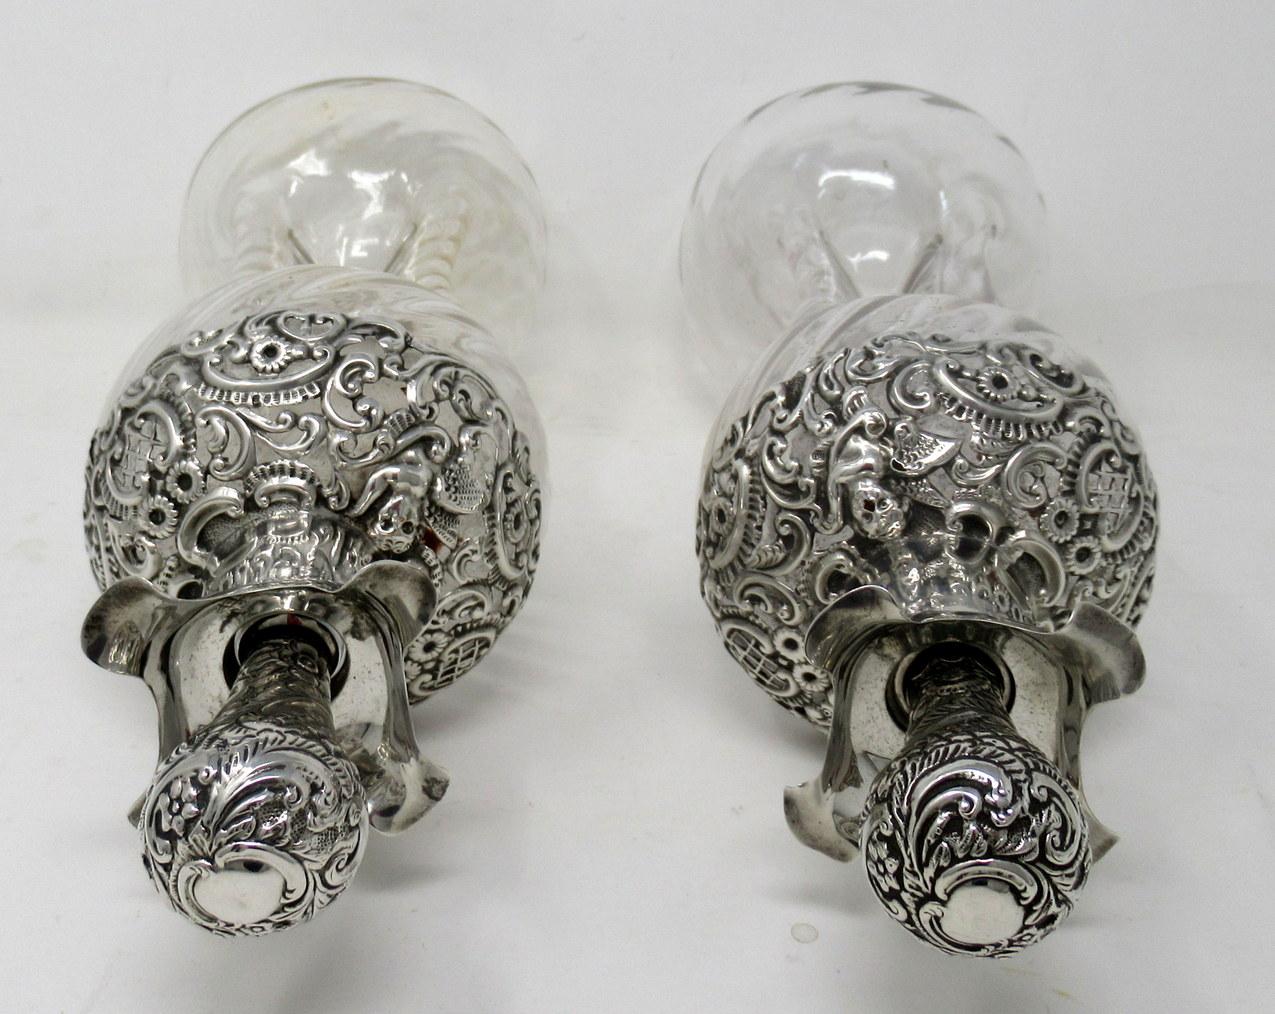 Pair of Full Lead Crystal Hallmark Sterling Silver Spirits Wine Decanters, 1899 3